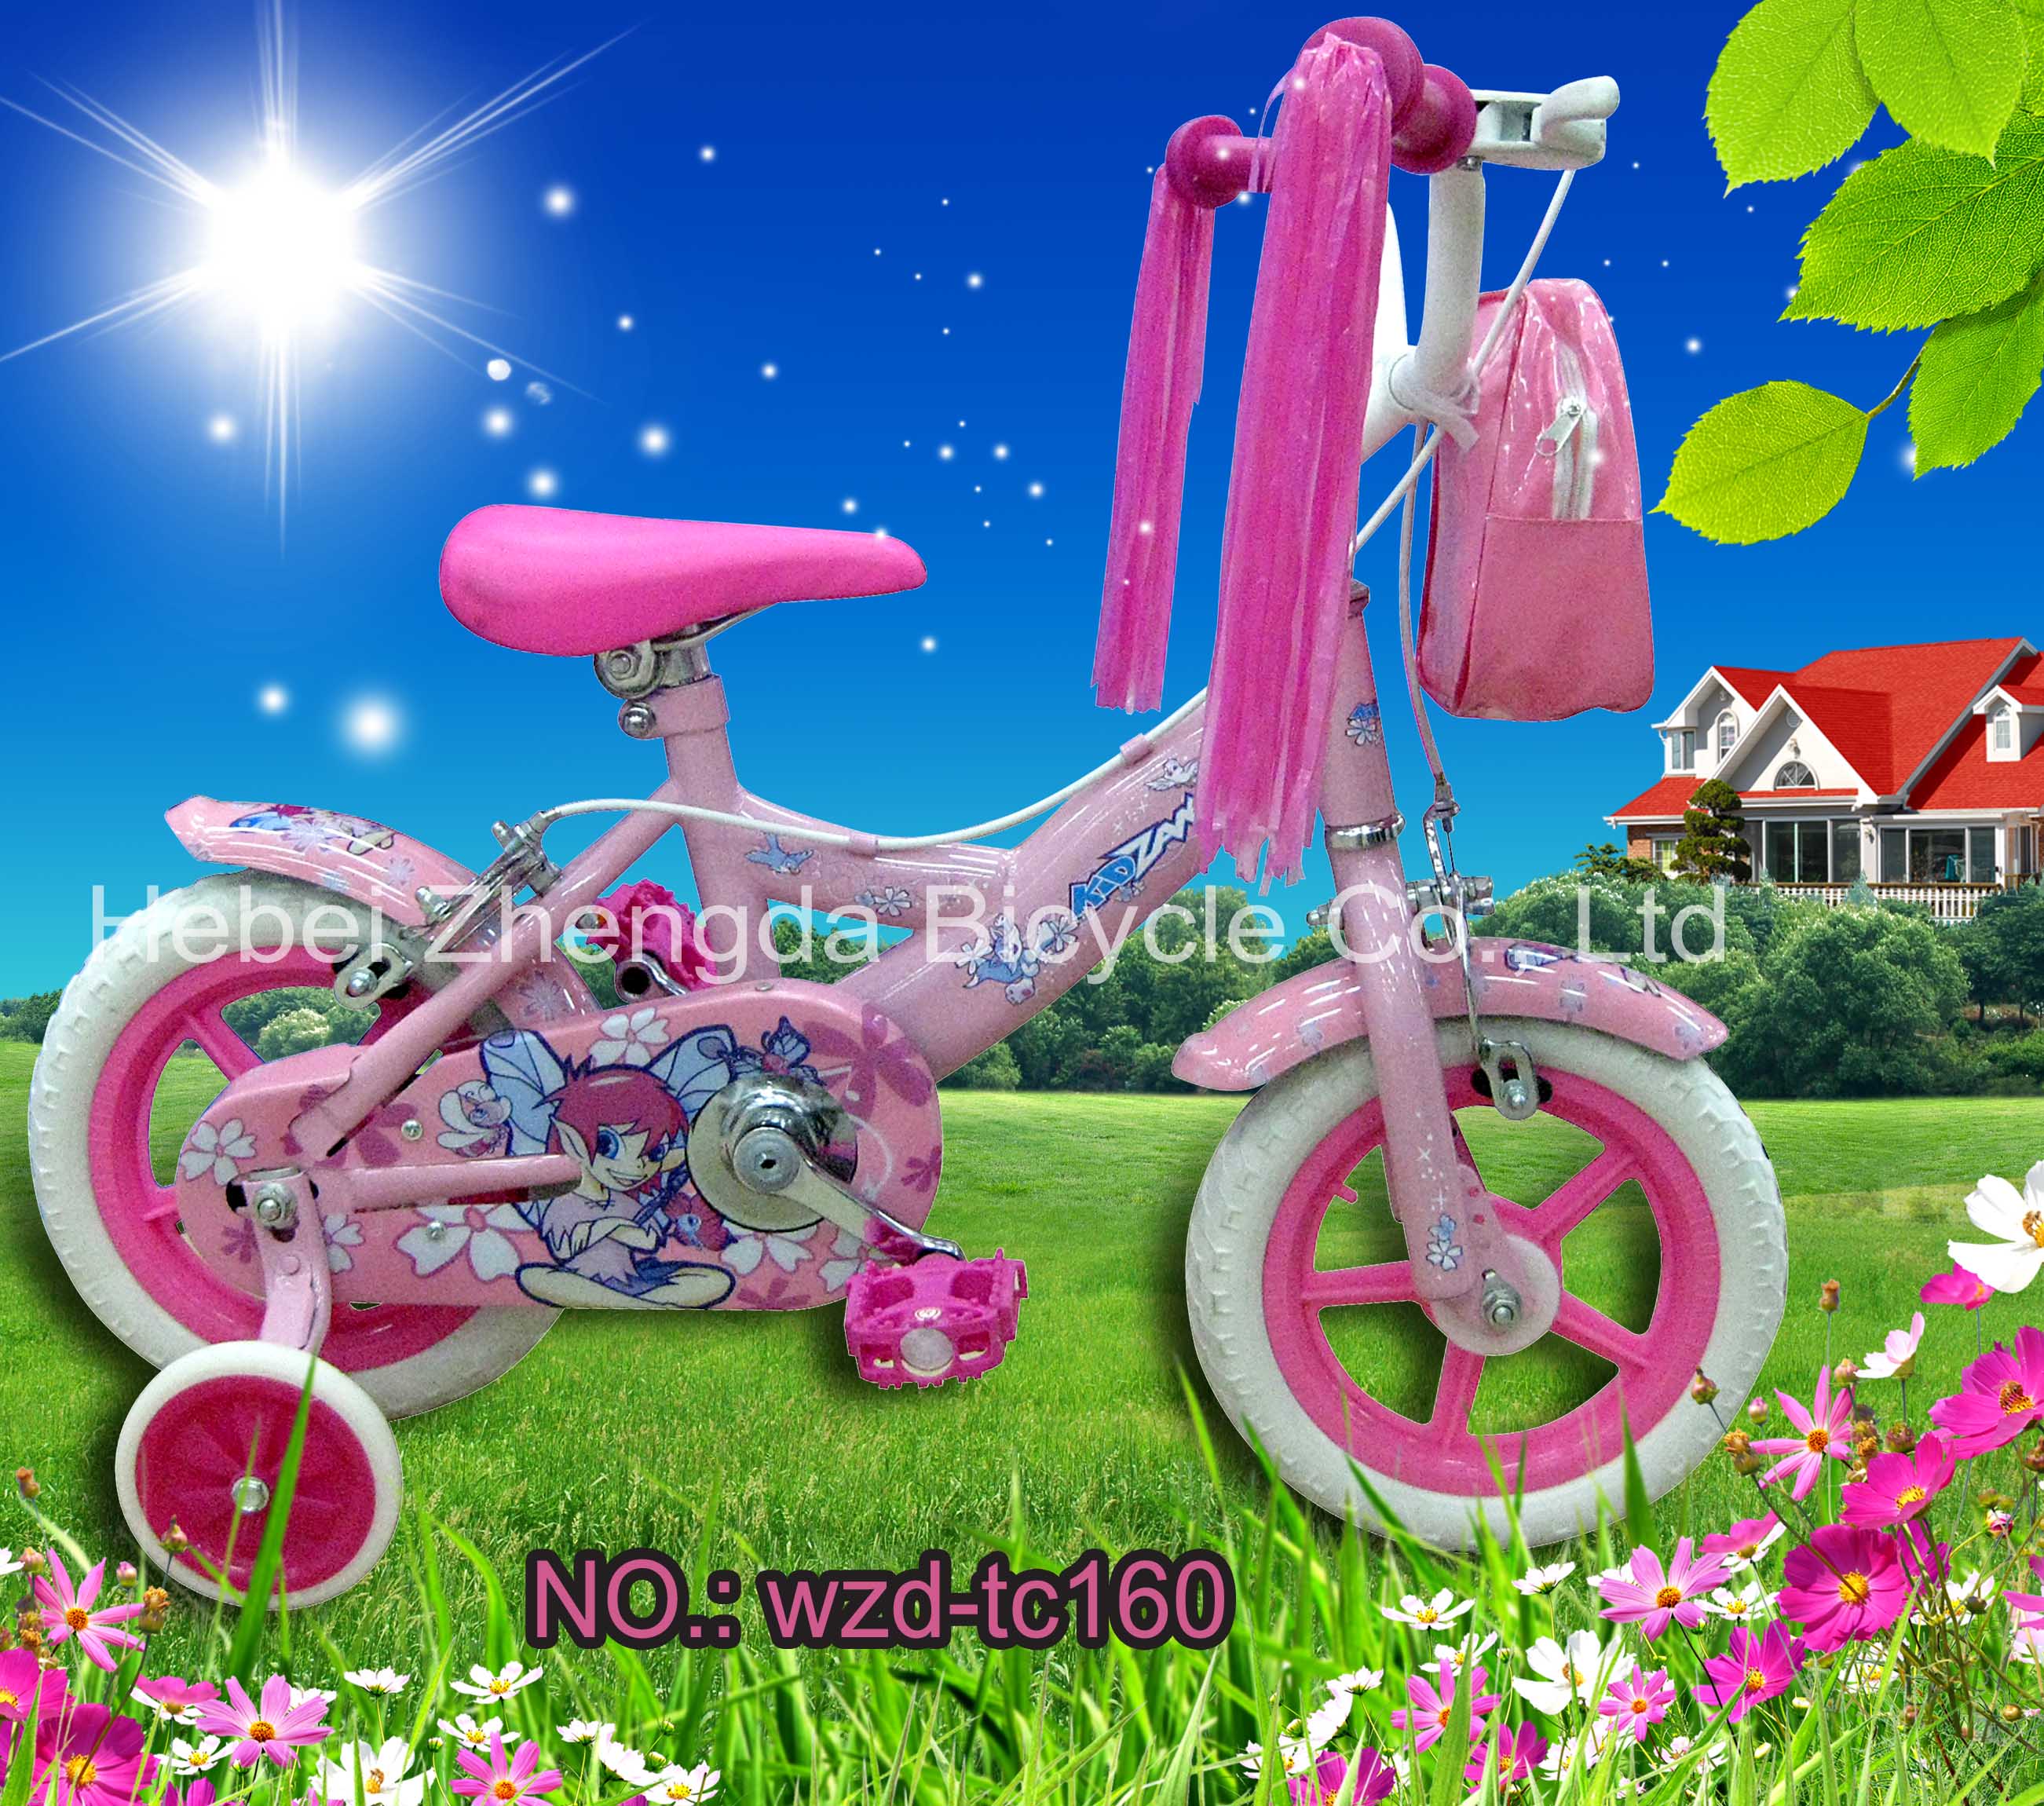 children's bicycle made in China